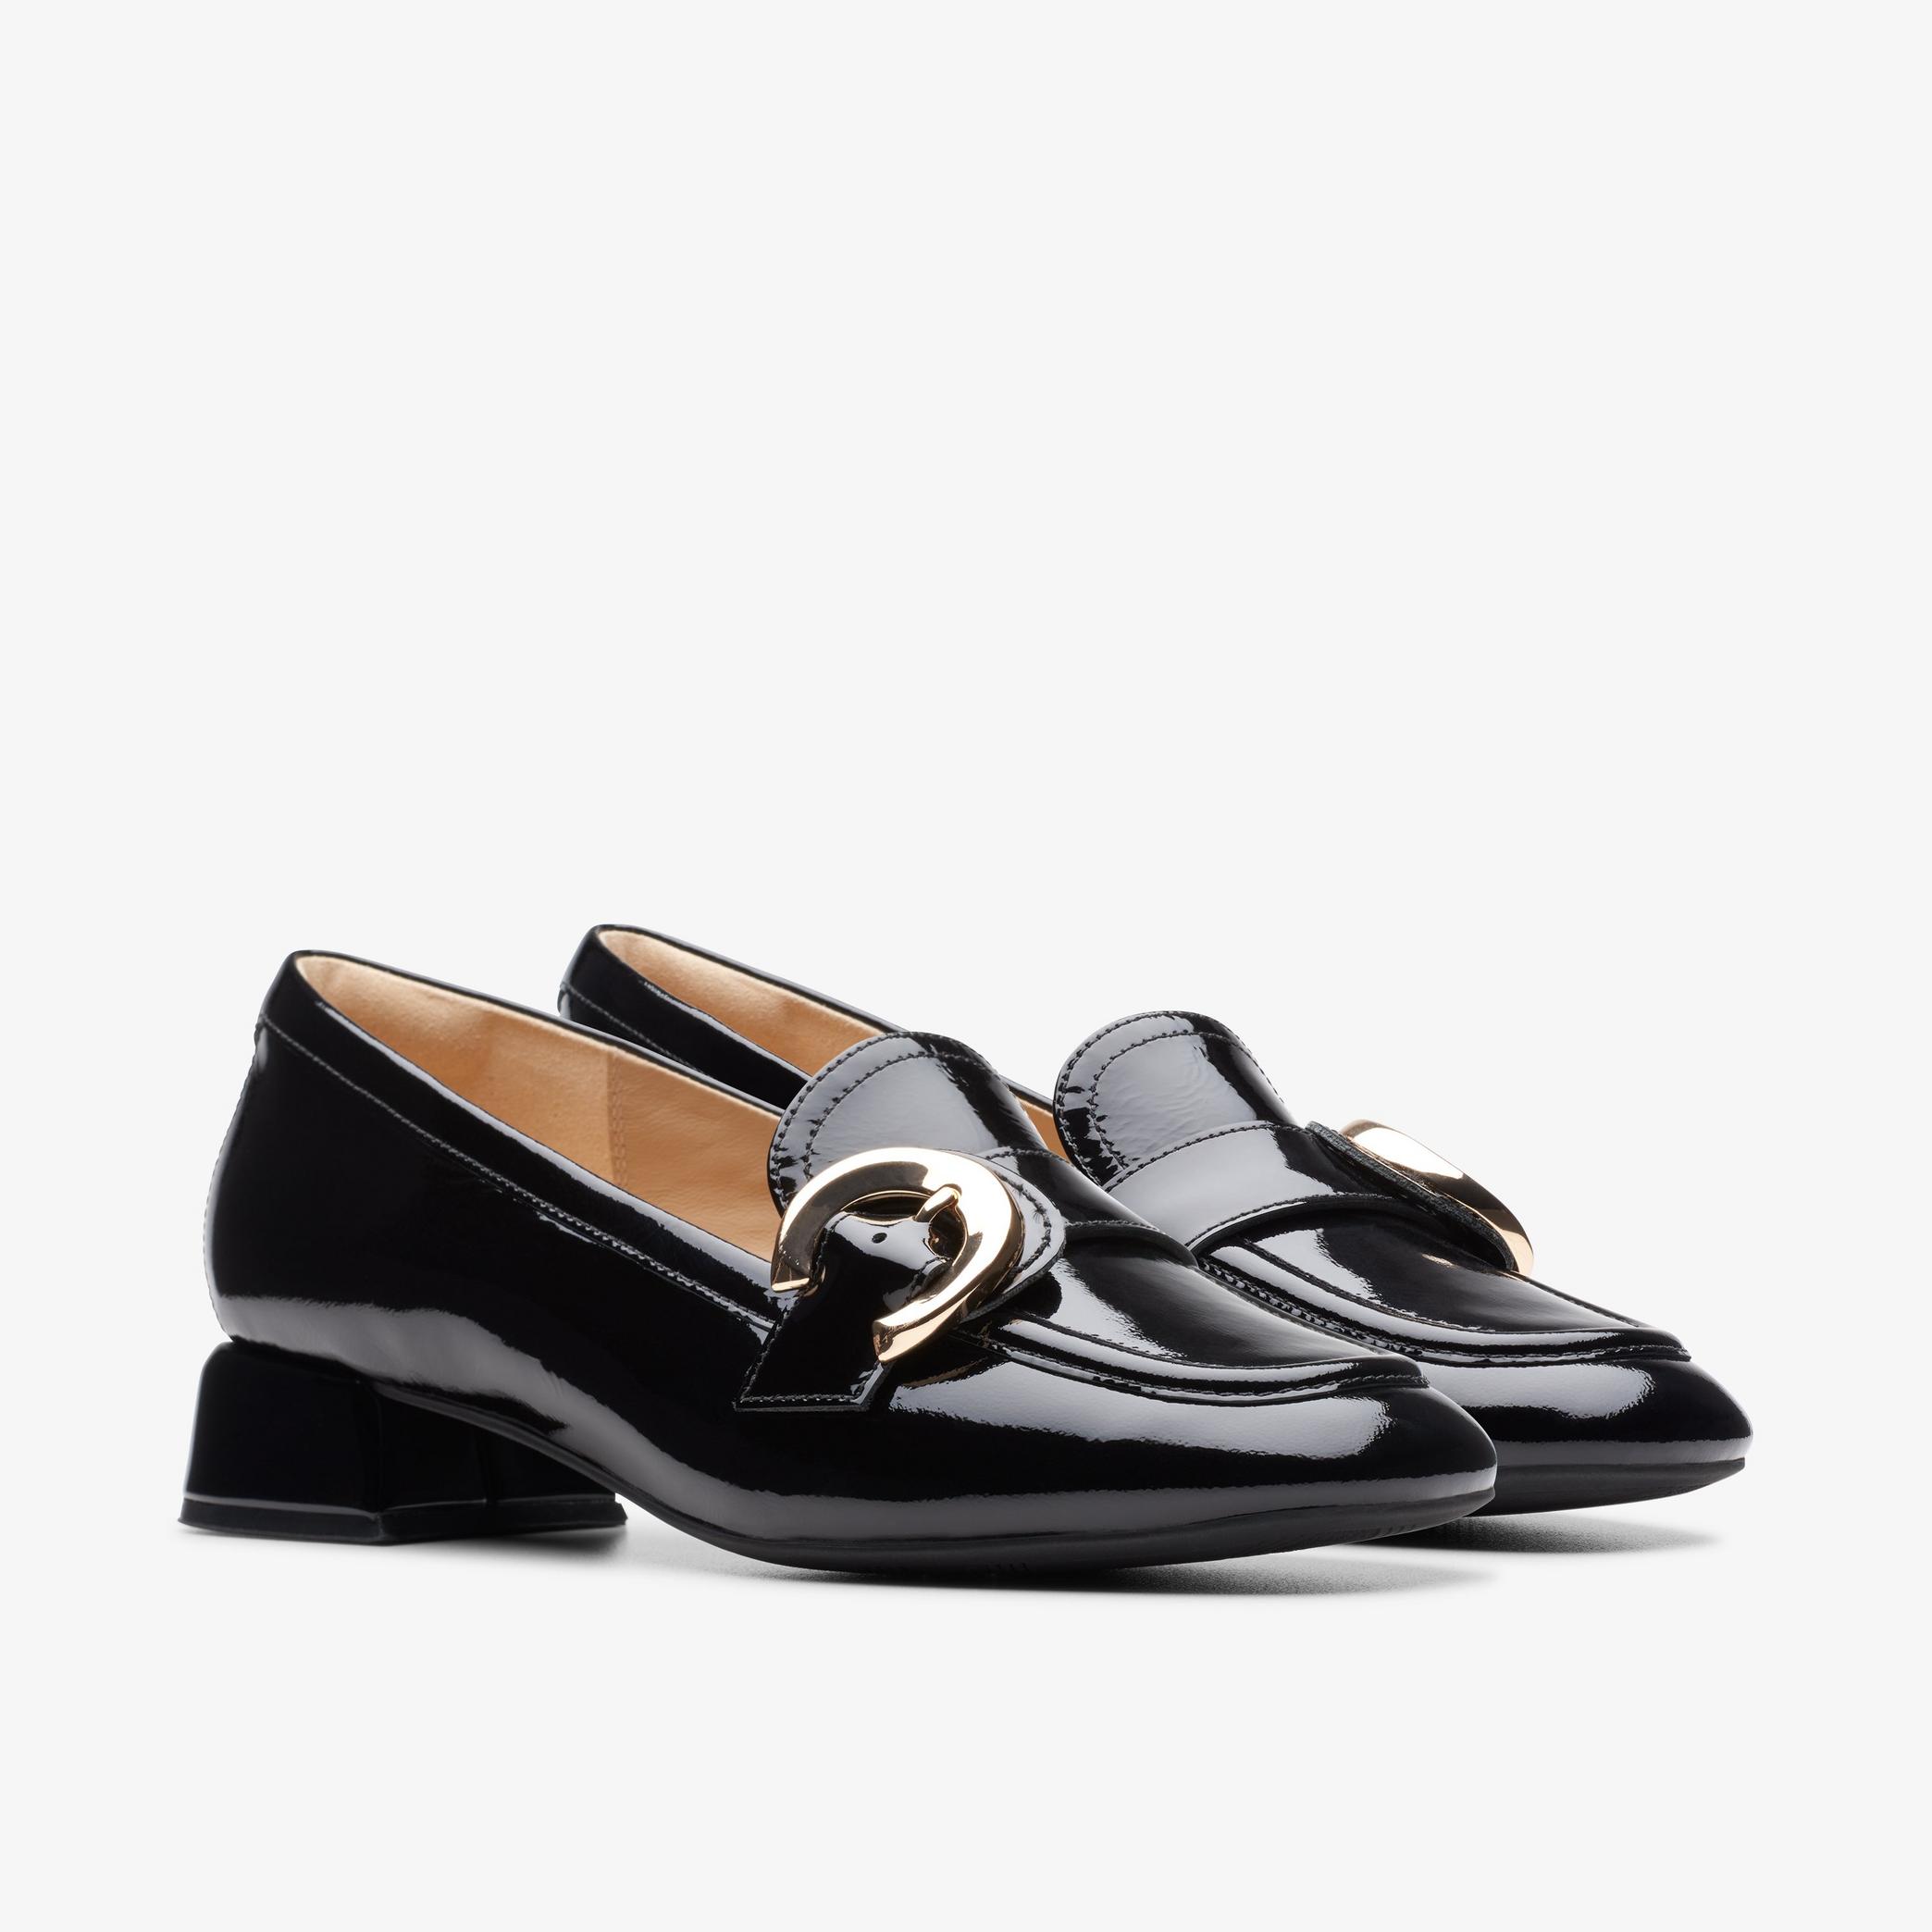 WOMENS Daiss 30 Trim Black Patent Loafers | Clarks US